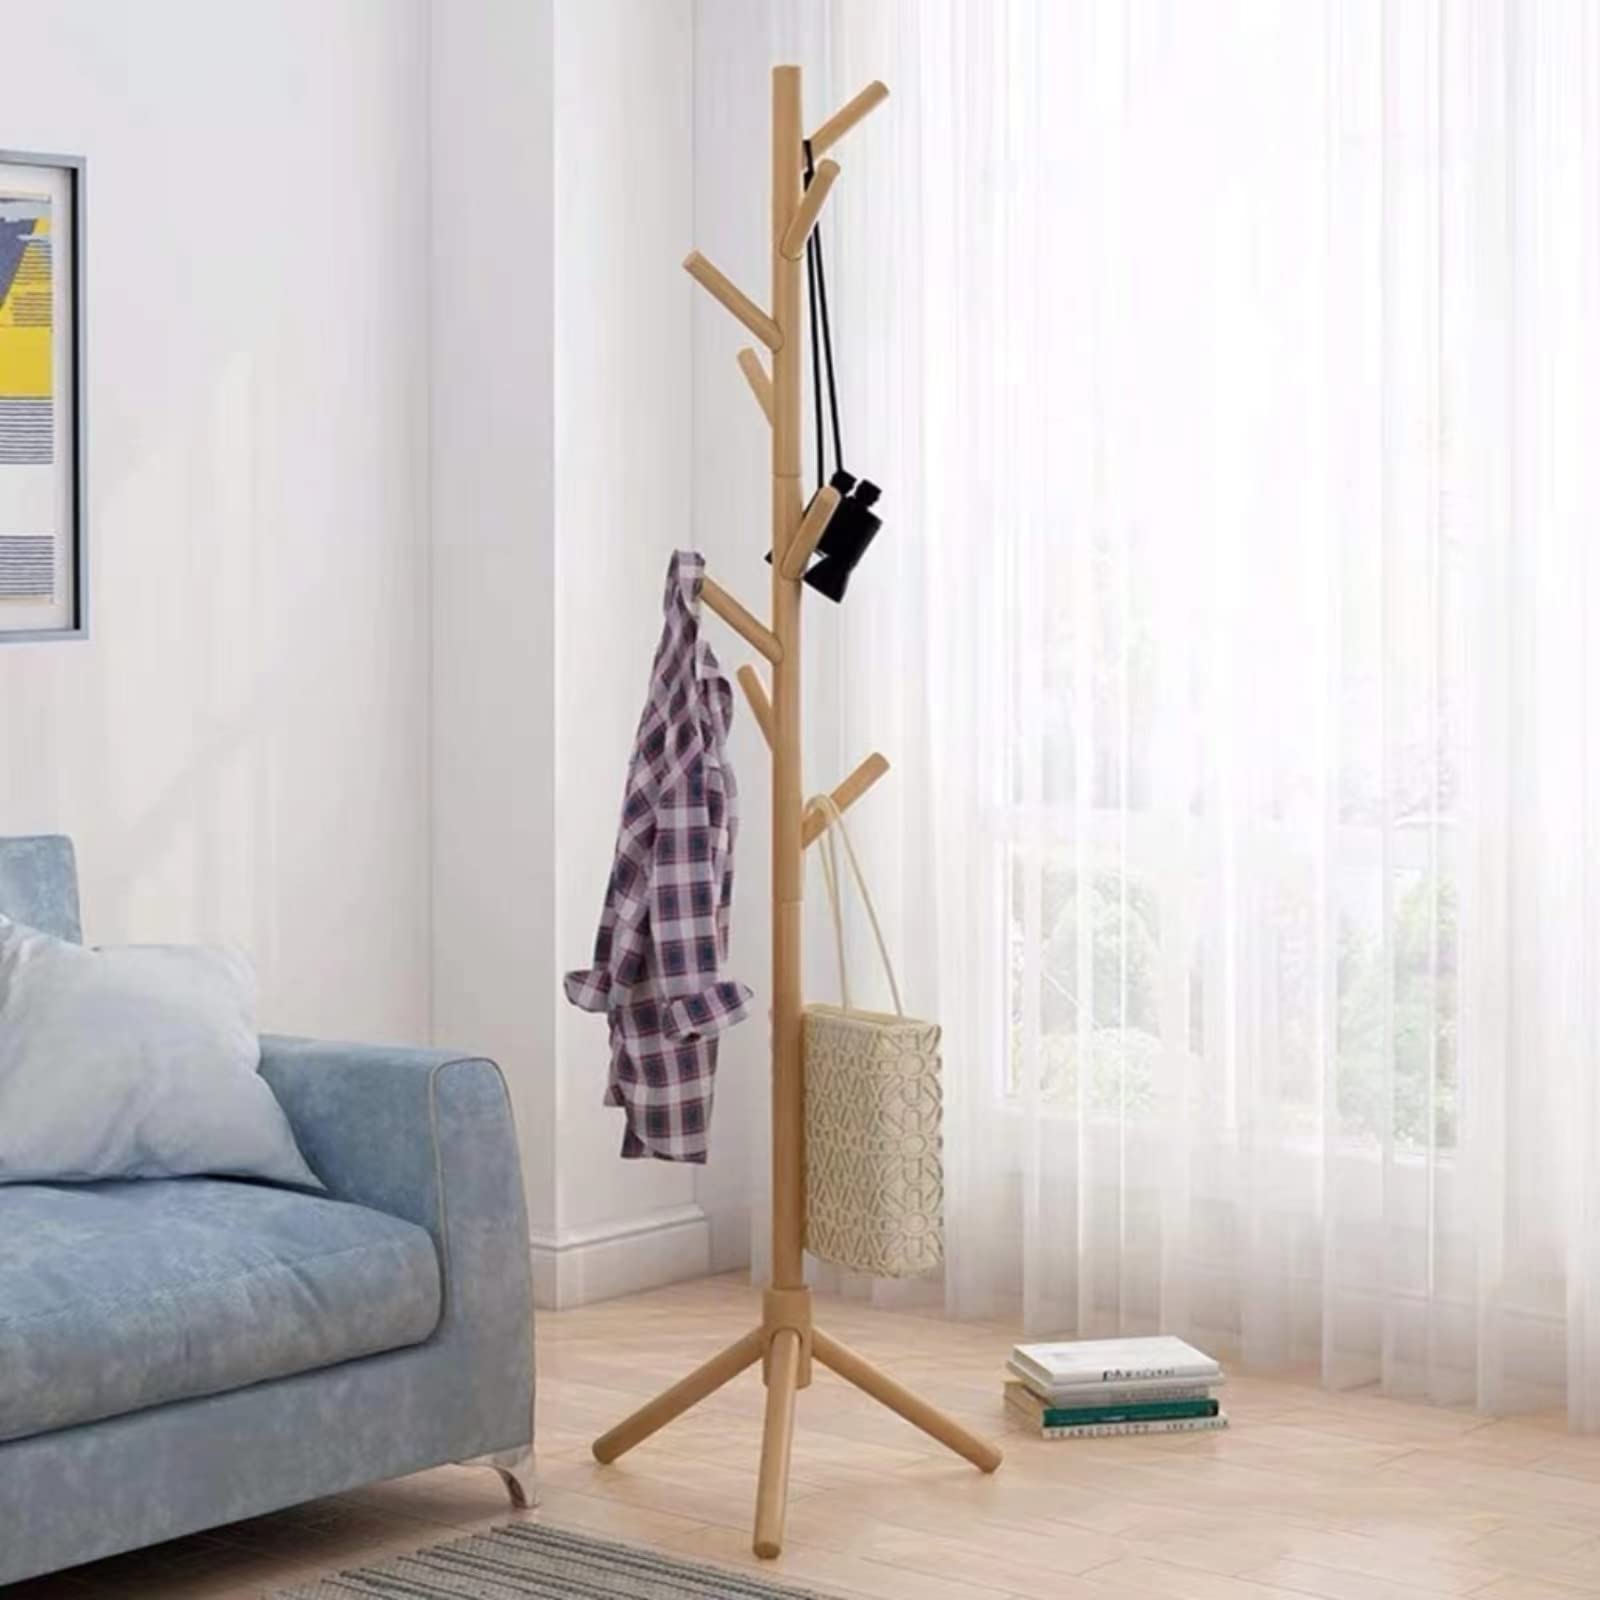 Buy Clothes Coat Rack Garment Stand Shelf Wooden Tree Hanger Bag Hat Hook  Holder Online | Kogan.com. The perfect accessory for your home's main  entry or rumpus room, this versatile coat rack